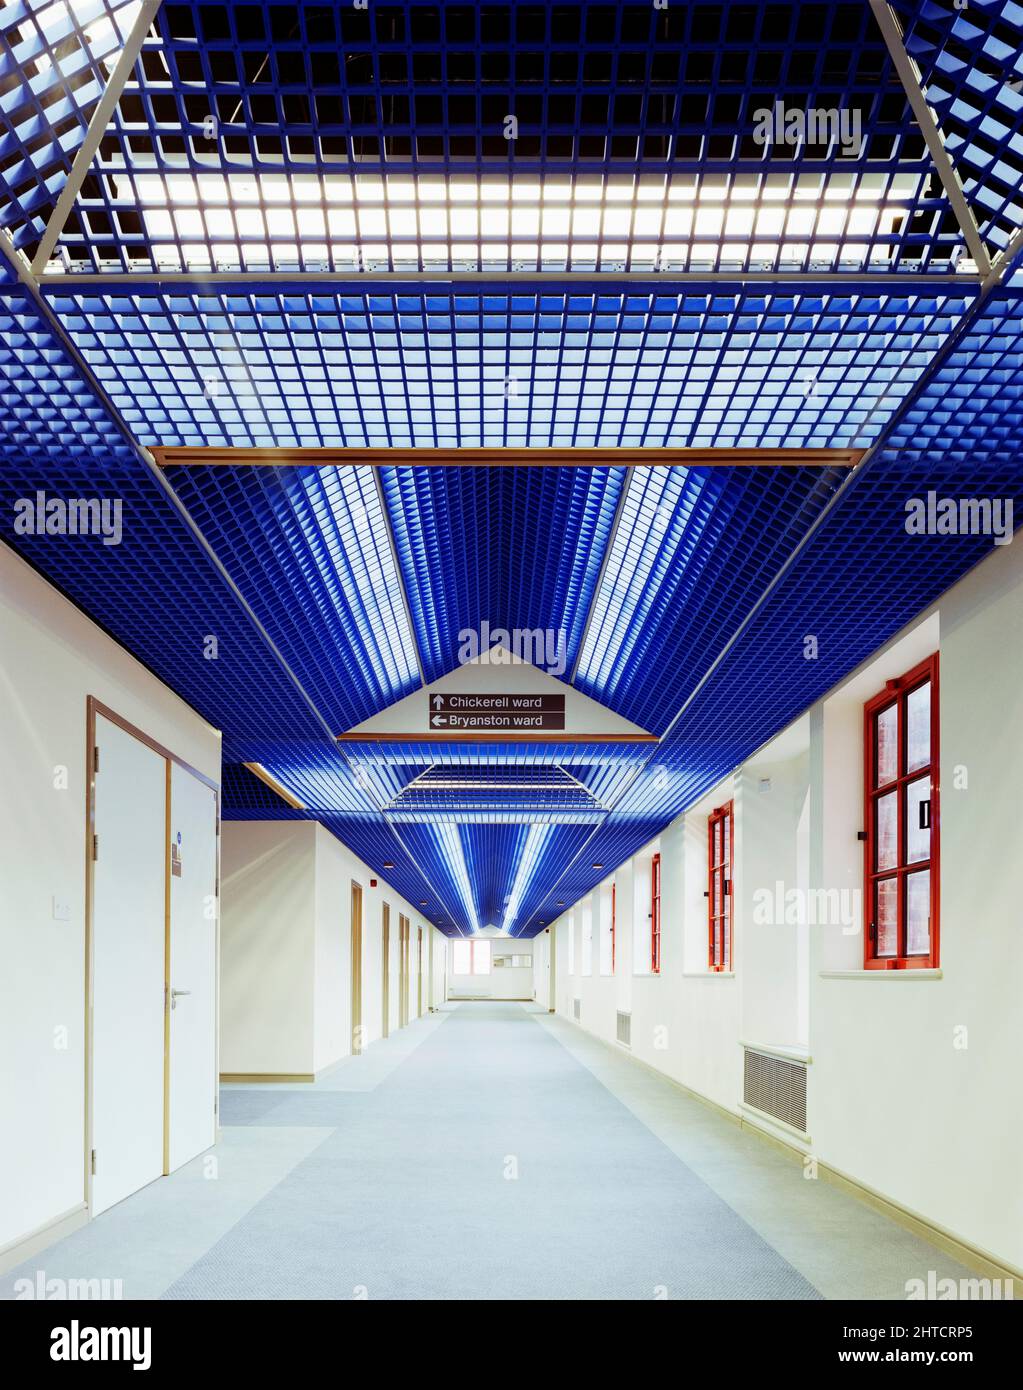 West Dorset County Hospital, Dorchester, West Dorset, Dorset, 08/04/1987. A view along a corridor at West Dorset County Hospital showing the decorative suspended ceiling. In the early 1980s plans were developed for a modern hospital to replace the old Dorchester Hospital, at a new site to the west of the town centre. A joint venture of Laing&#x2019;s South West Region and Haden Young Limited were responsible for Phase I of the construction project, which was to provide 149 beds and included maternity and geriatric units, two operating theatres and a pathology and X-ray department. Phase I on t Stock Photo